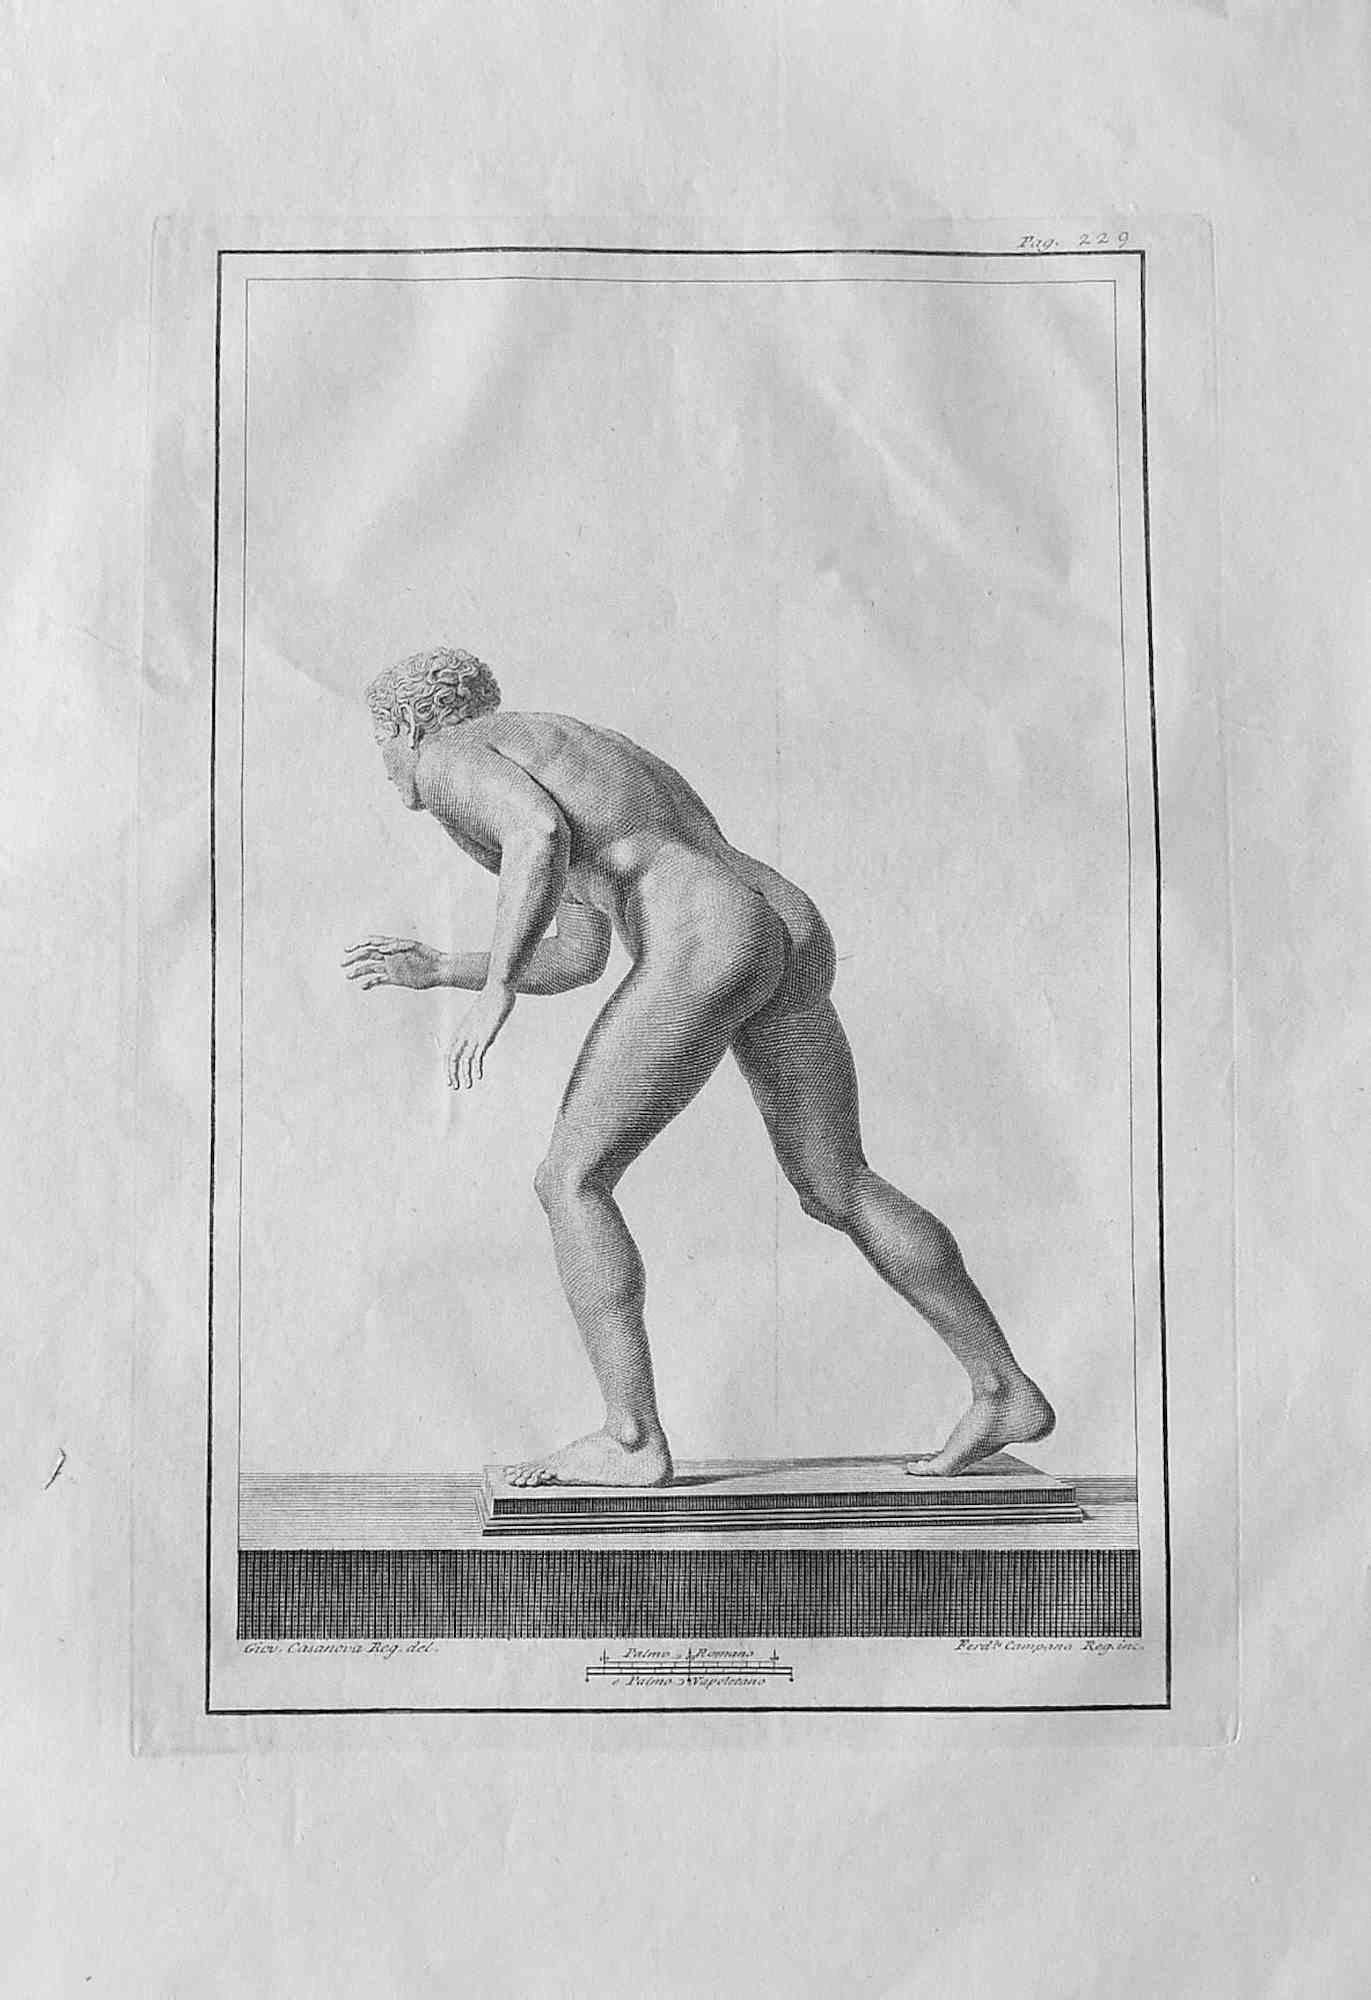 Ancient Roman Statue, from the series "Antiquities of Herculaneum", is an original etching on paper realized by P. Campana in the 18th century.

Signed on the plate, on the lower right.

Good conditions except for some foxings.

The etching belongs